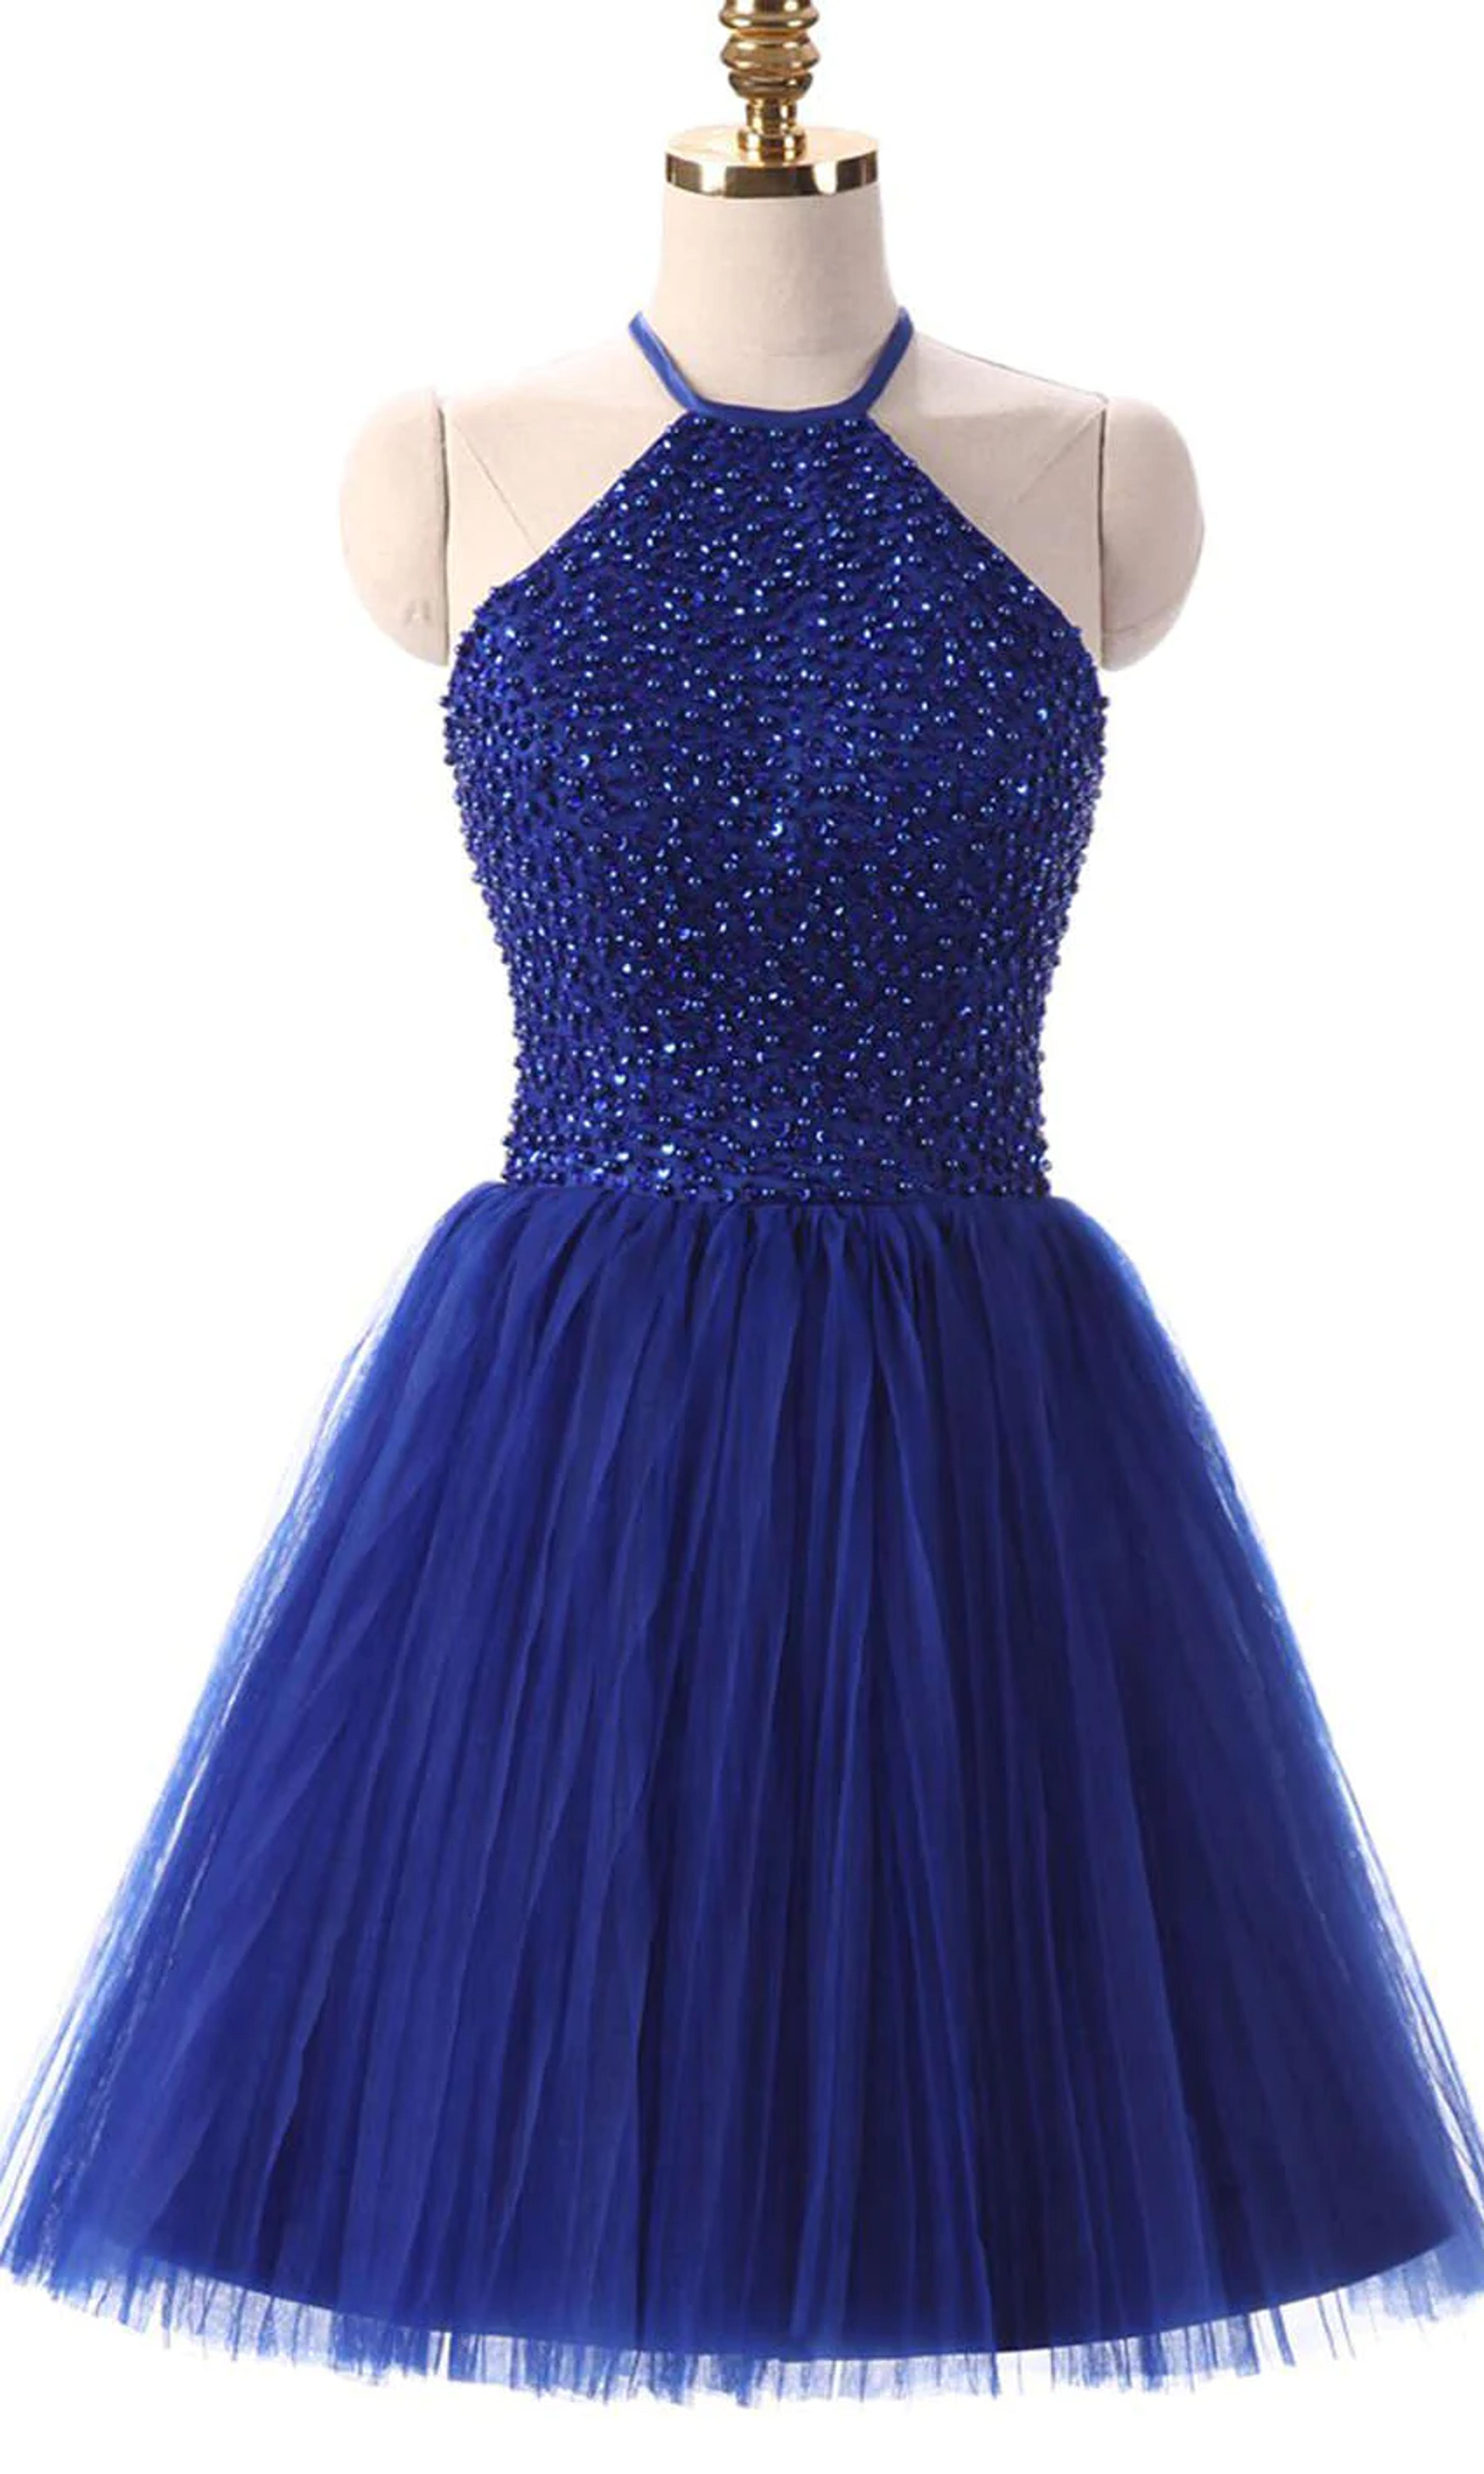 Royal Blue Short Beaded 8th Grade Prom Dresses with Keyhole Back P505 – promboutiqueonline